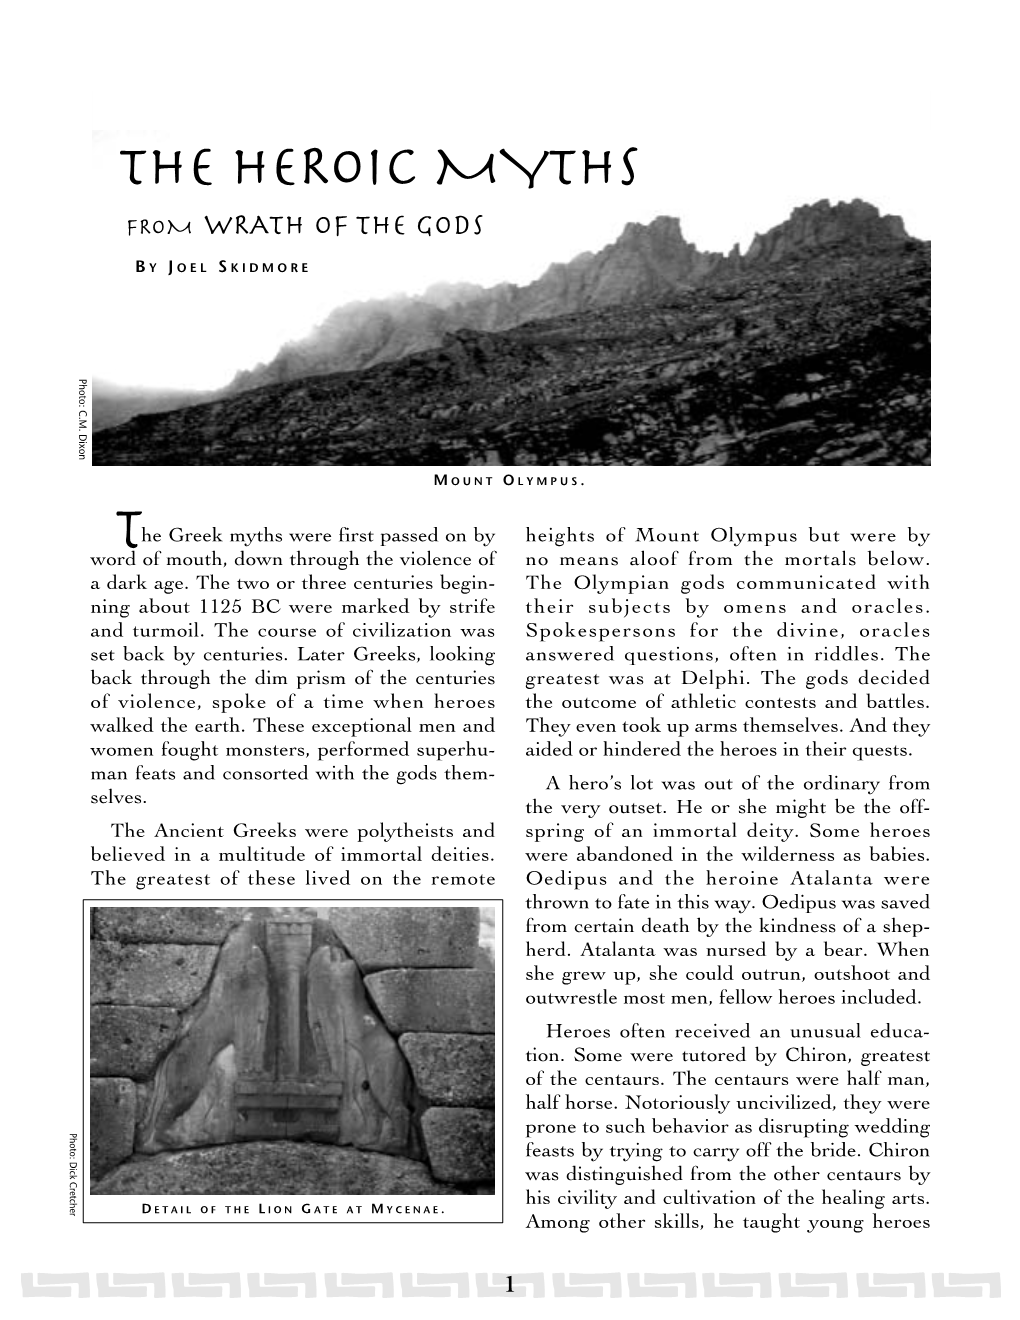 The Heroic Myths from Wrath of the Gods